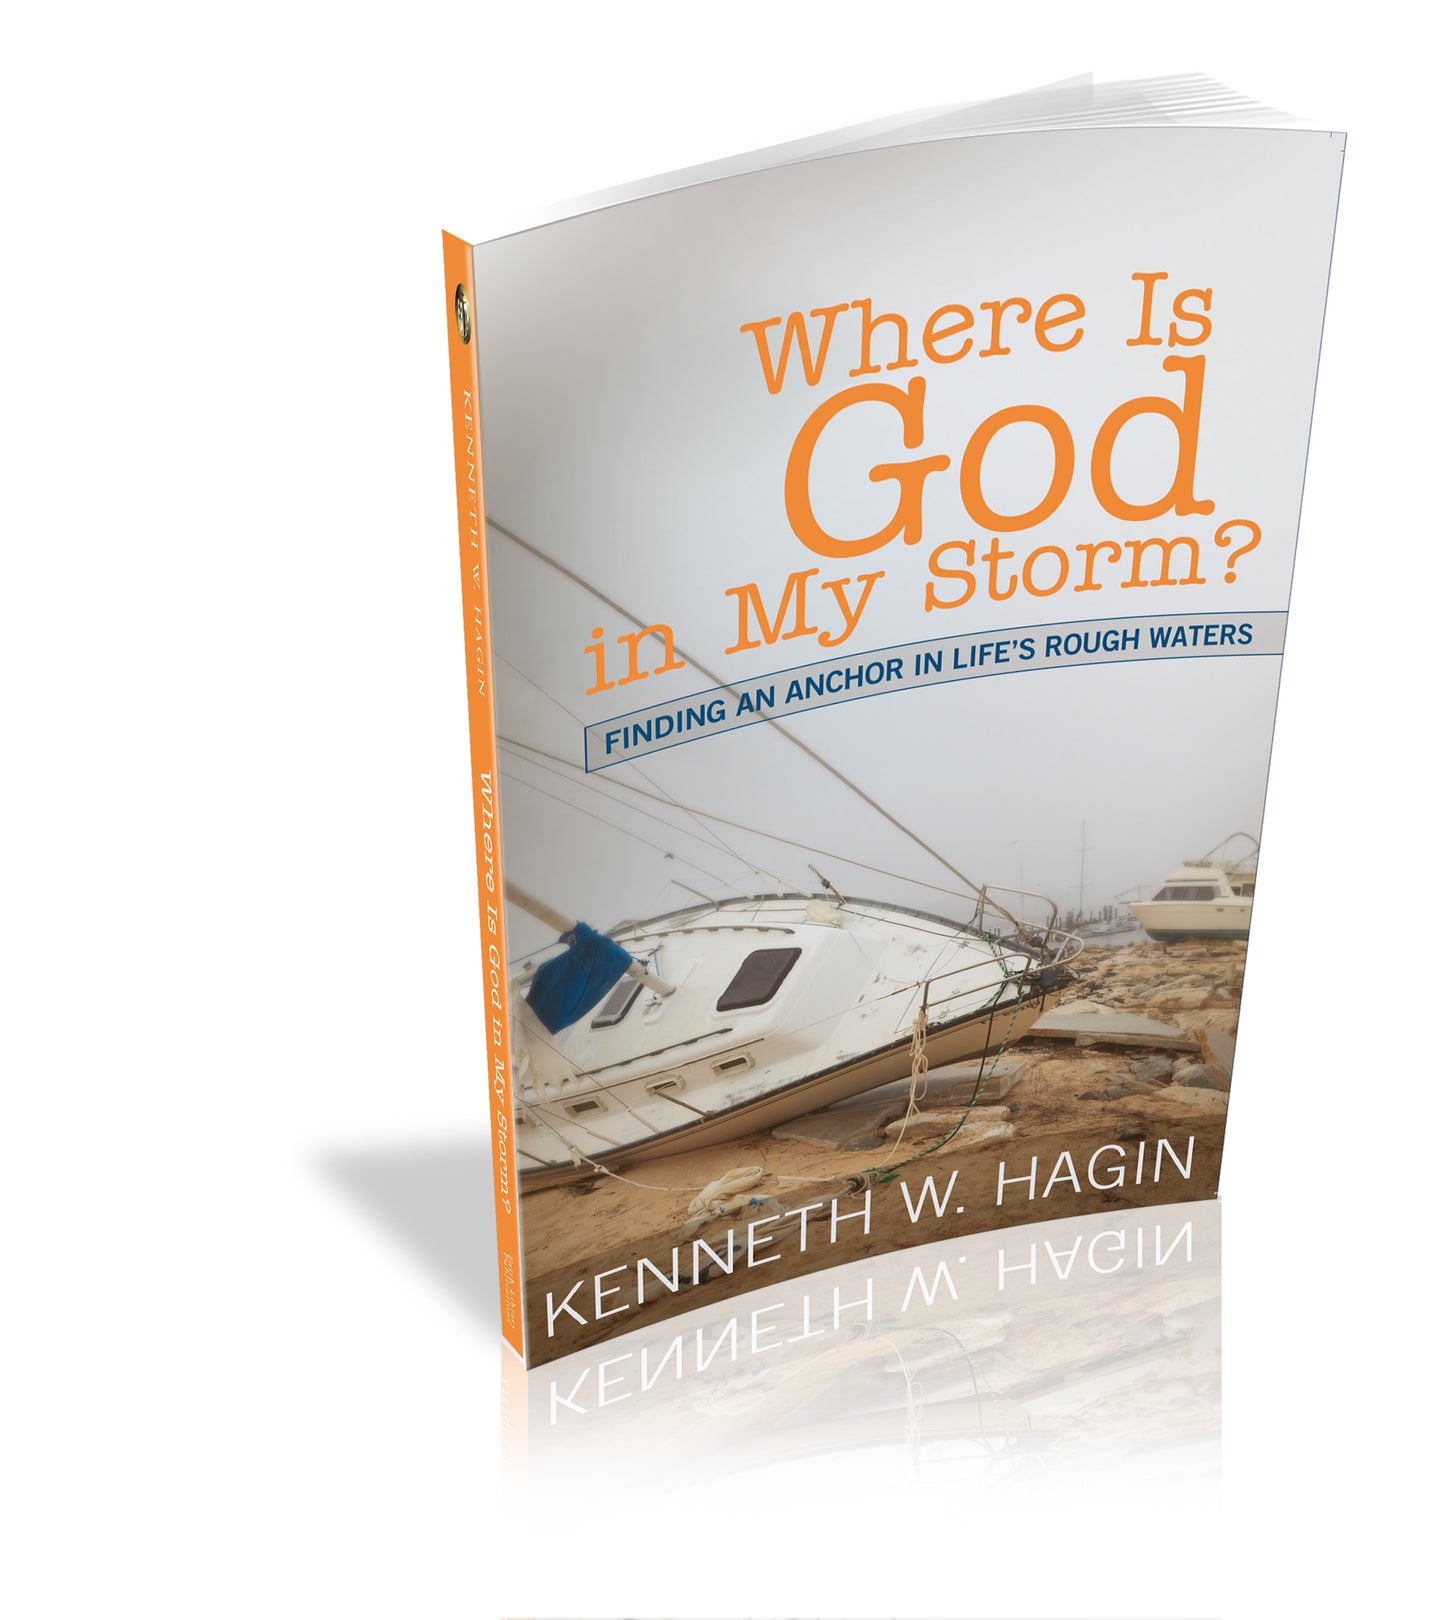 Where Is God in My Storm? Finding an Anchor in Life’s Rough Waters